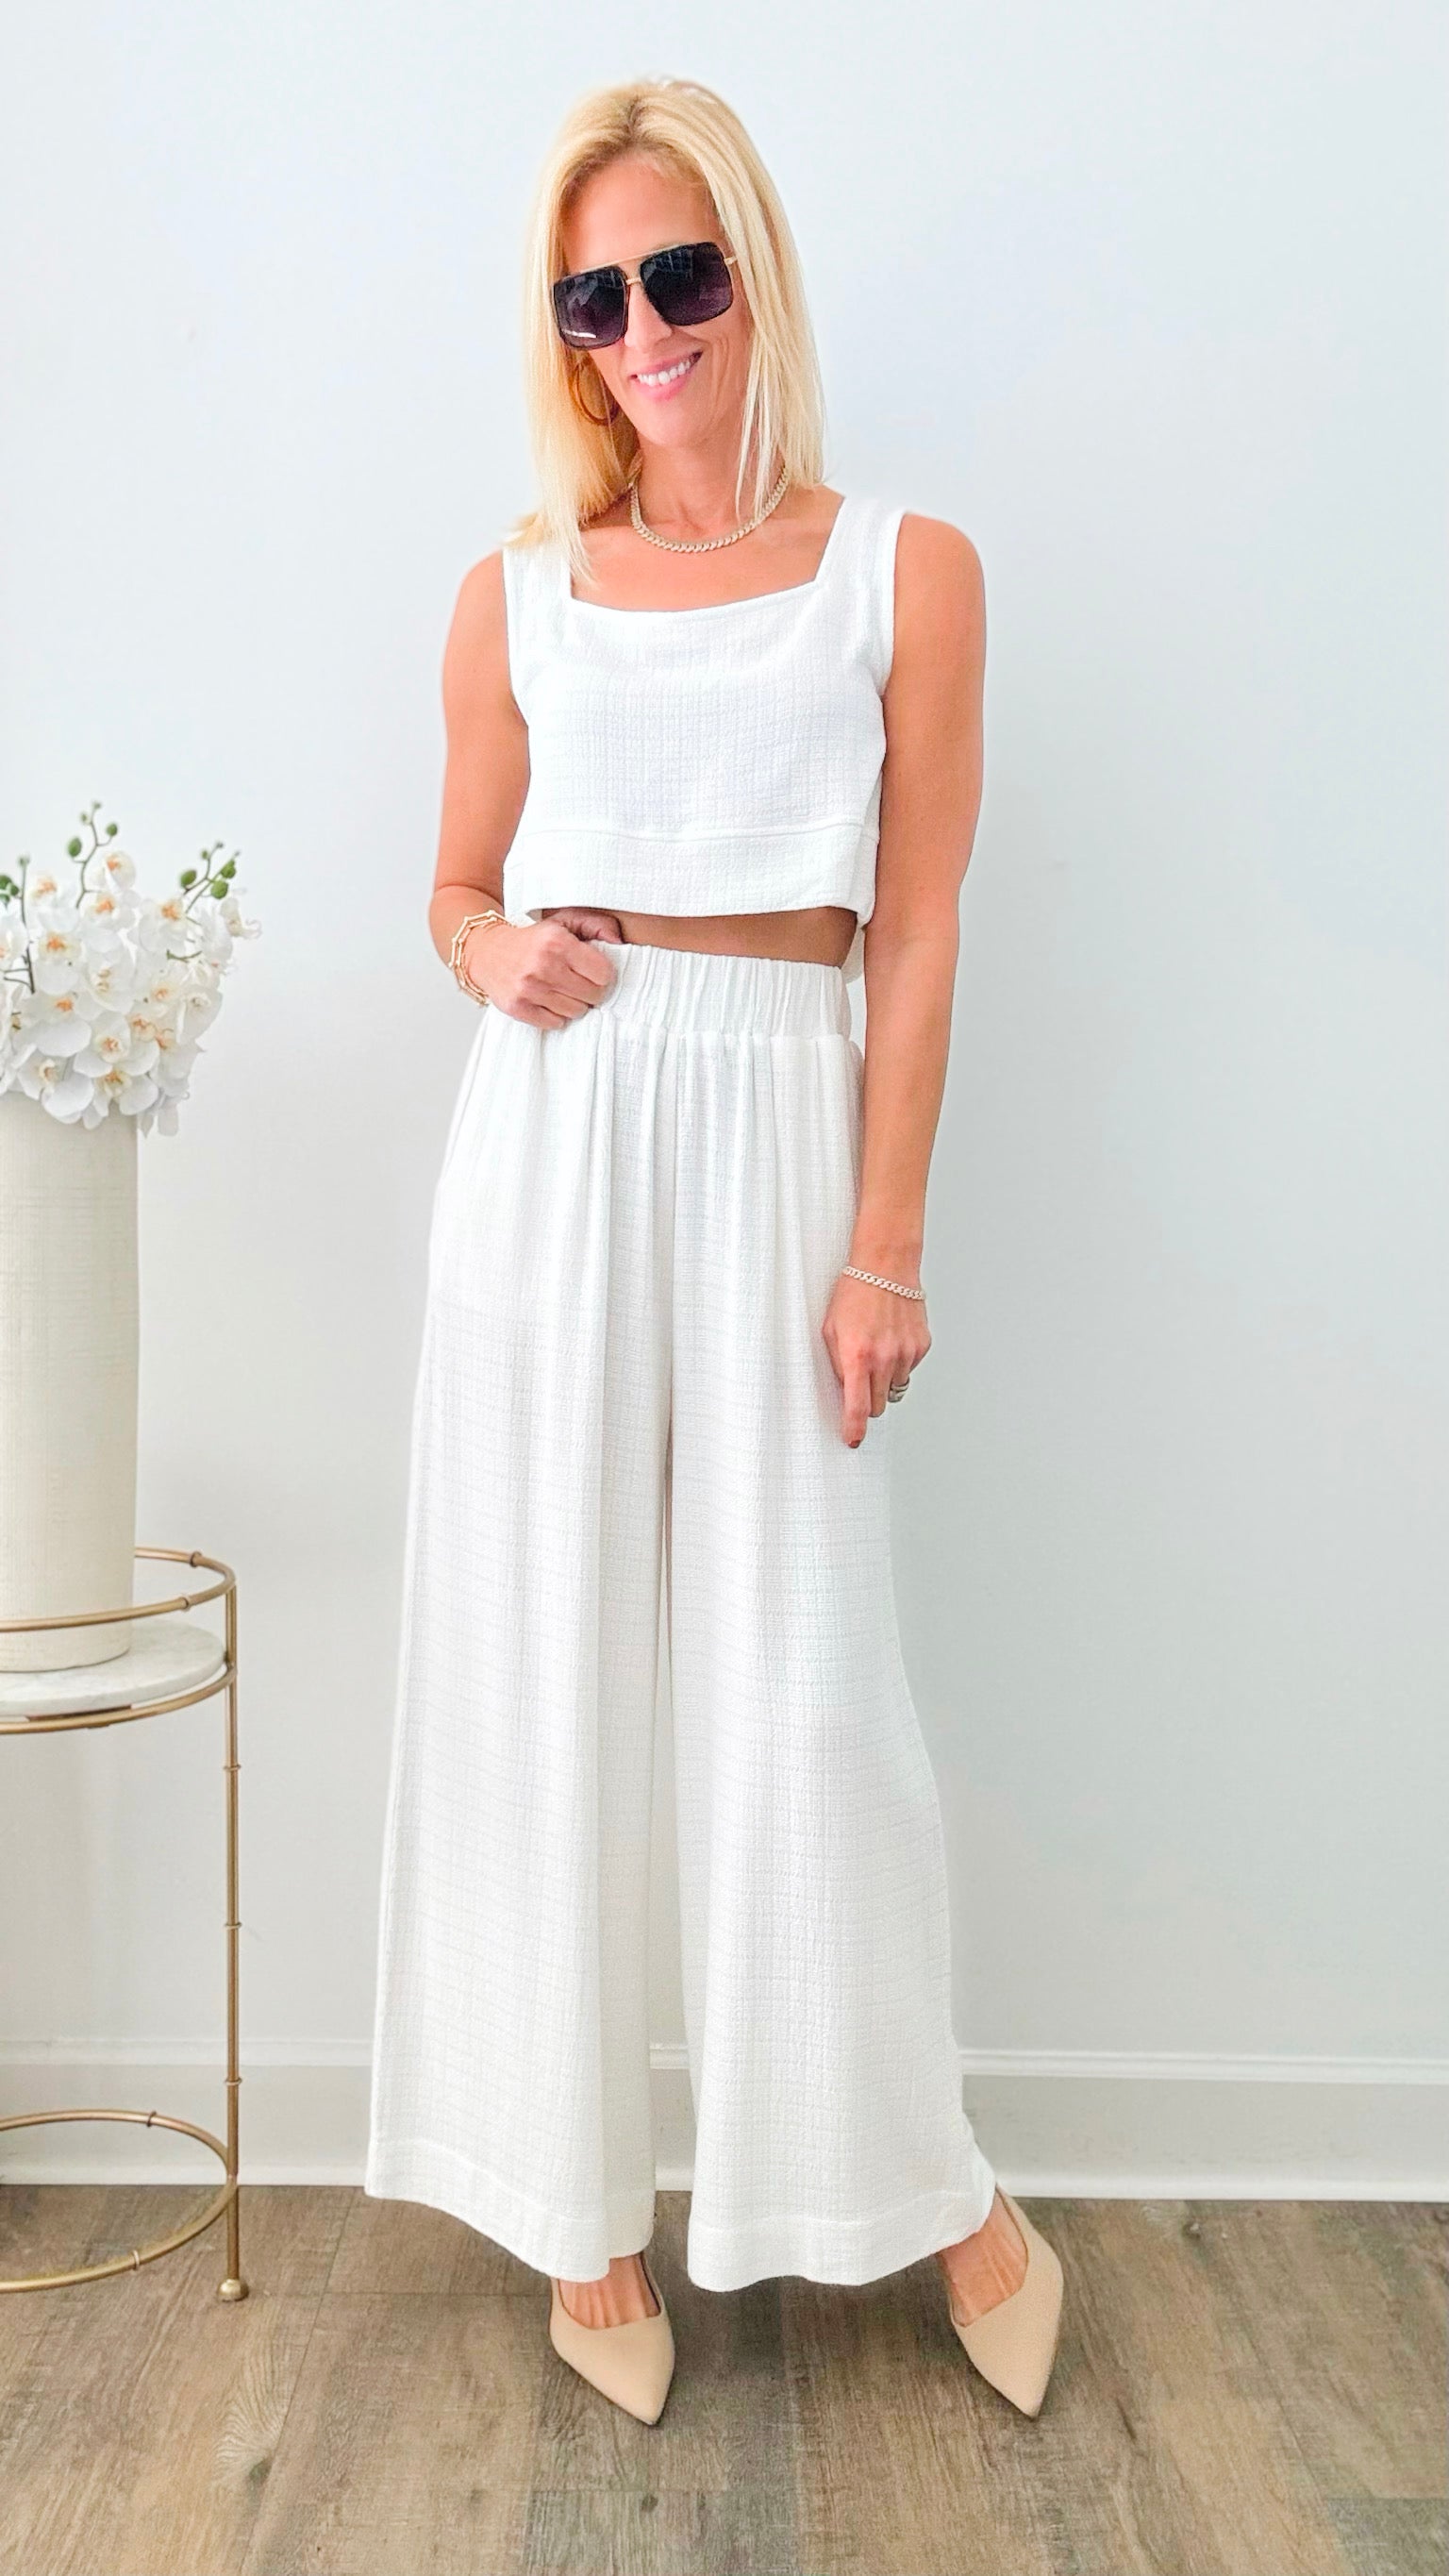 Fresh Look Linen Sleeveless Crop Top-100 Sleeveless Tops-Before You-Coastal Bloom Boutique, find the trendiest versions of the popular styles and looks Located in Indialantic, FL